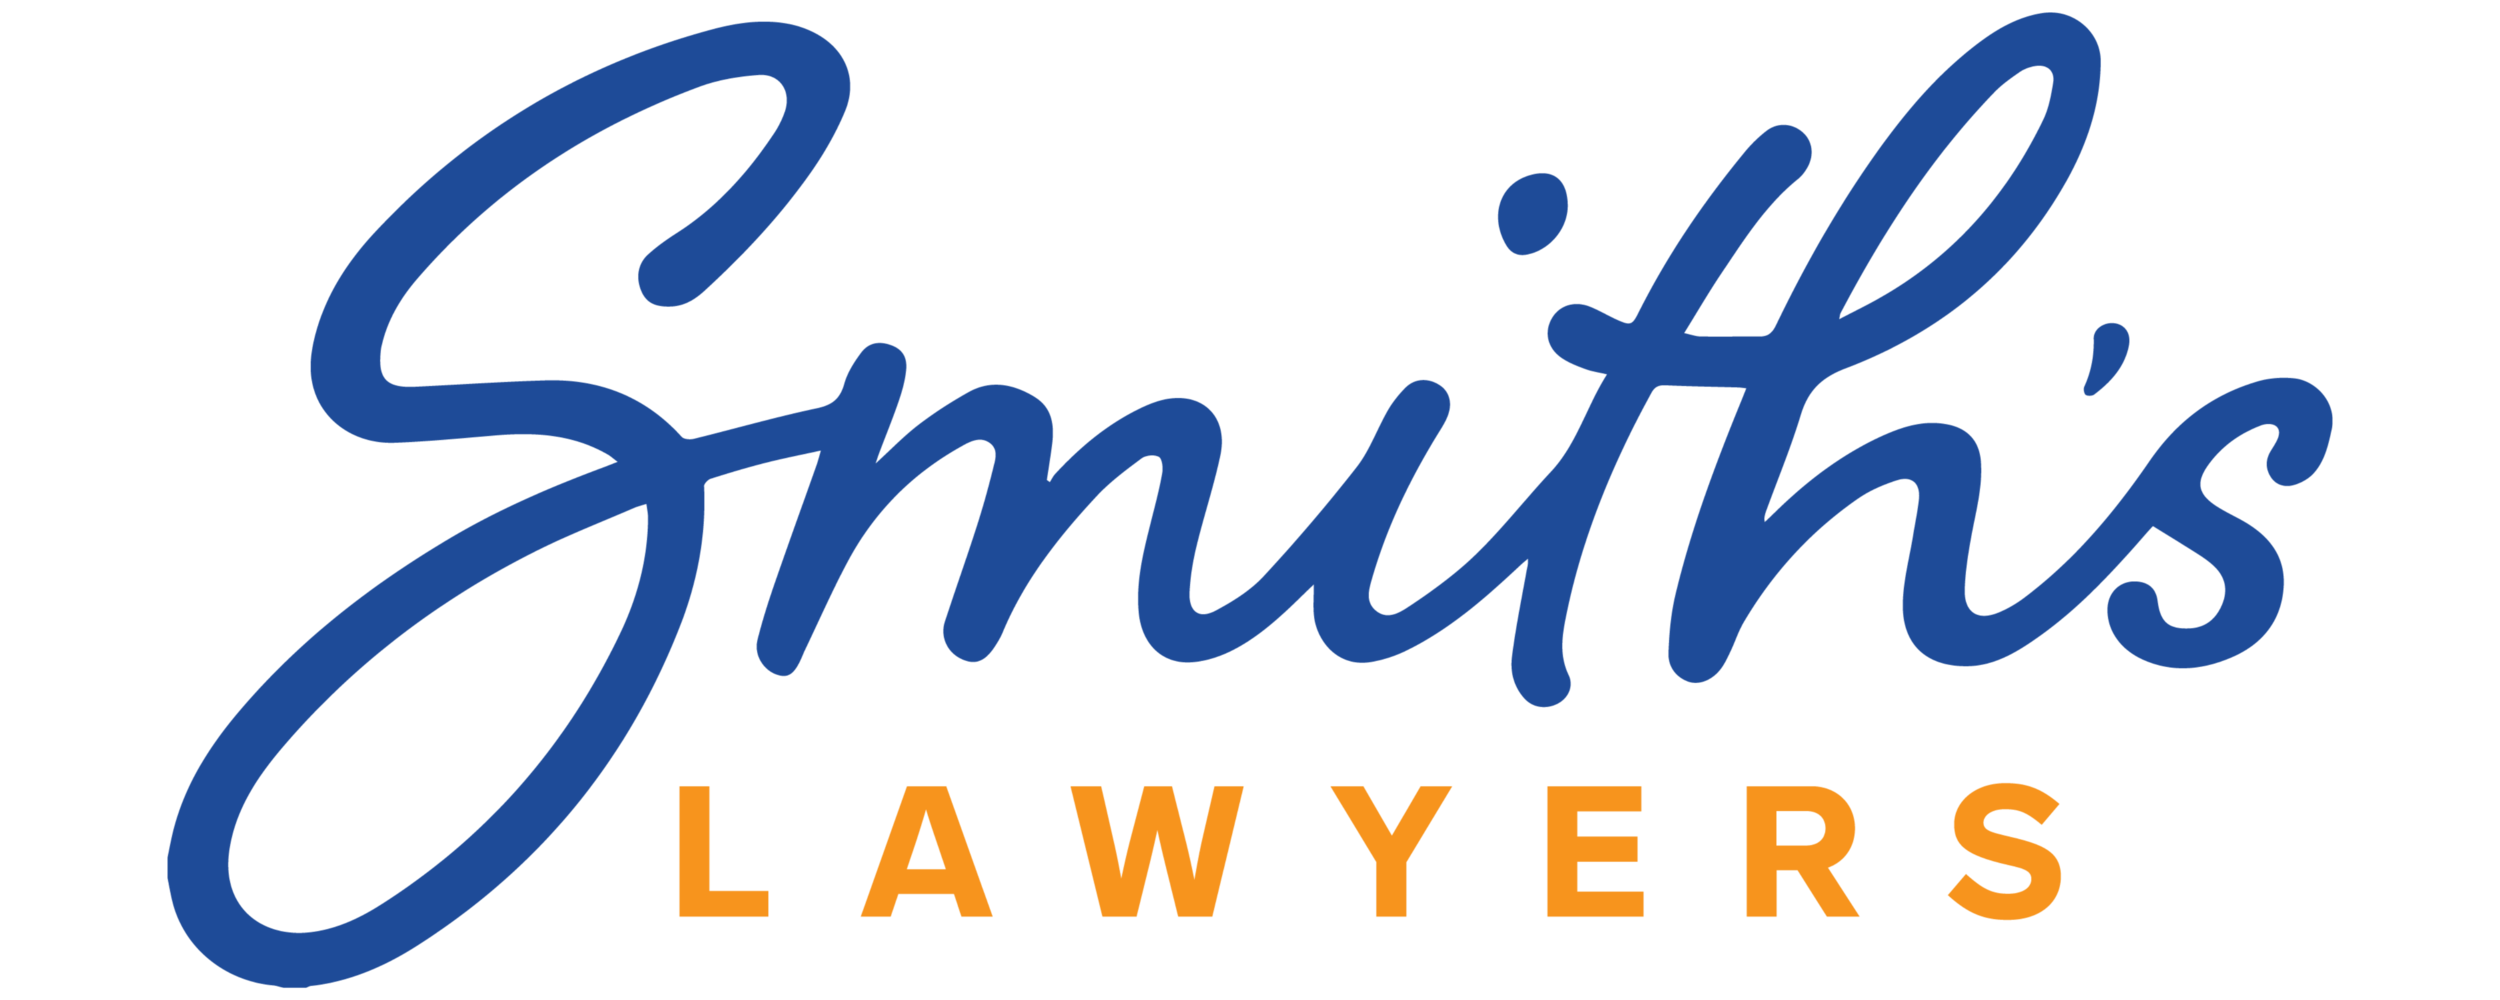 Smith's Lawyers Logo.png